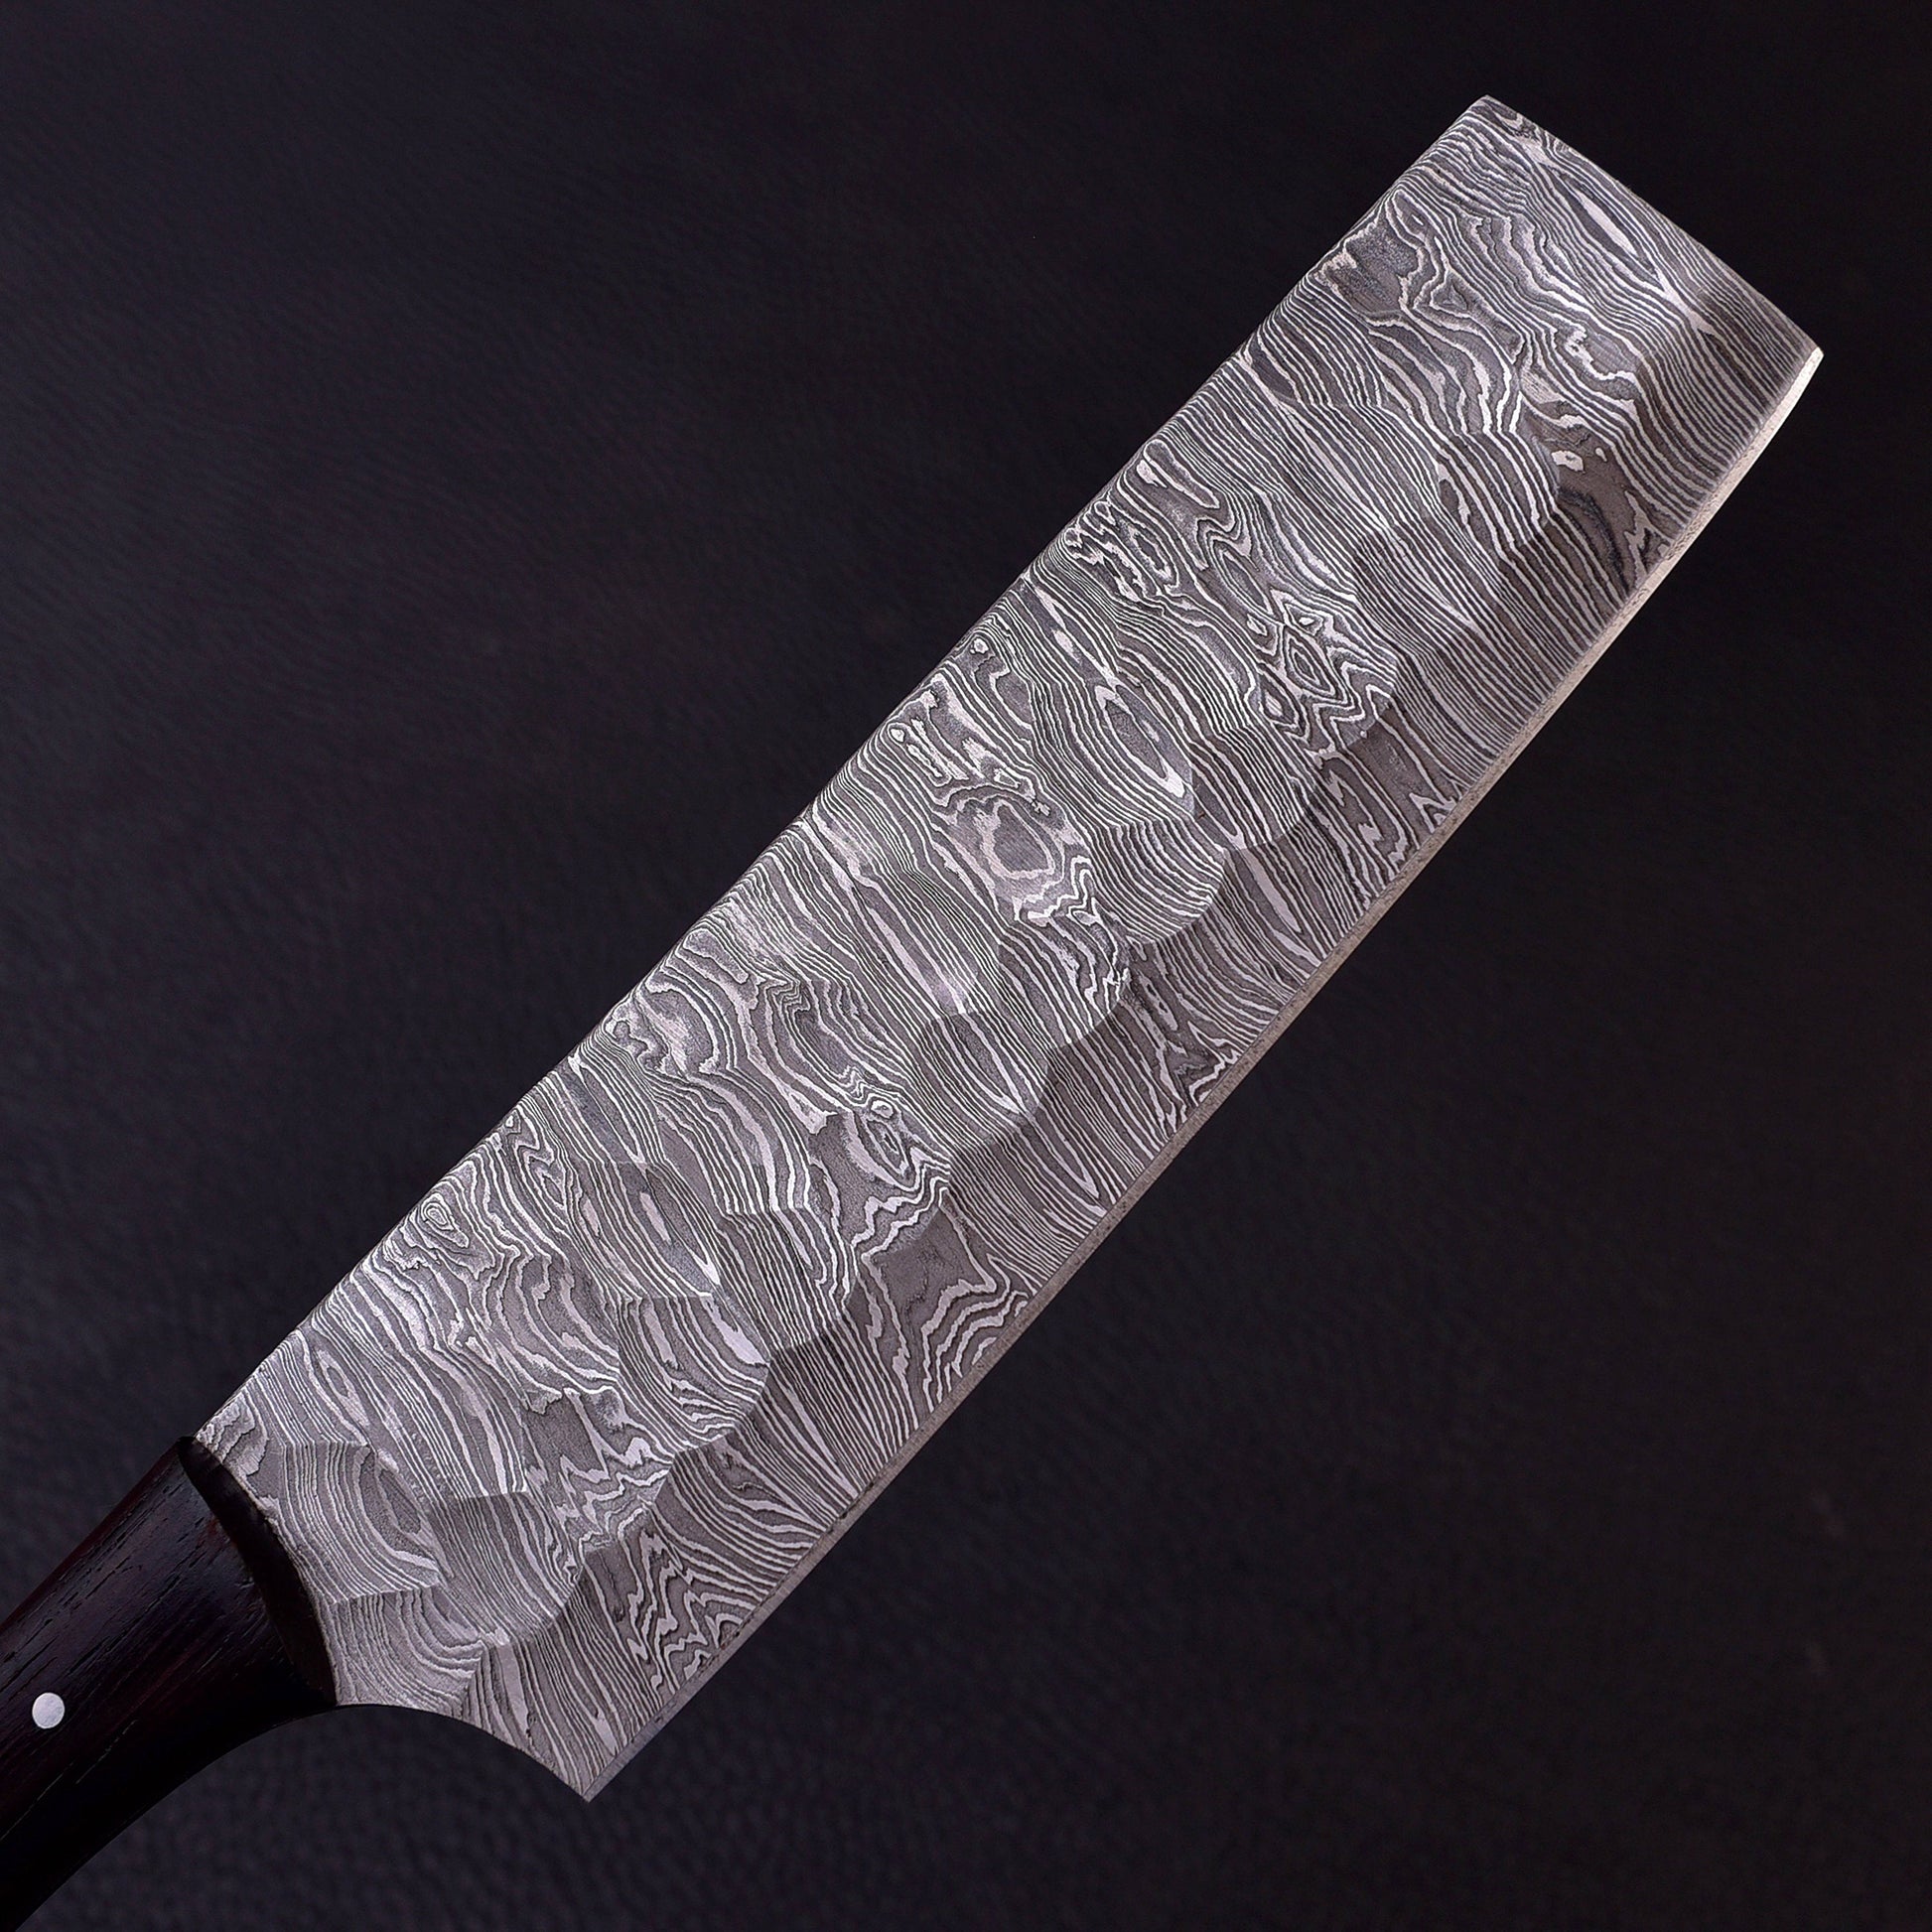 12" Damascus Steel Kitchen Cleaver - Indoor/Outdoor BBQ Cooking Chopper Solid Full Tang Rose Wood Handle Handmade Butcher Blade Gift for Him